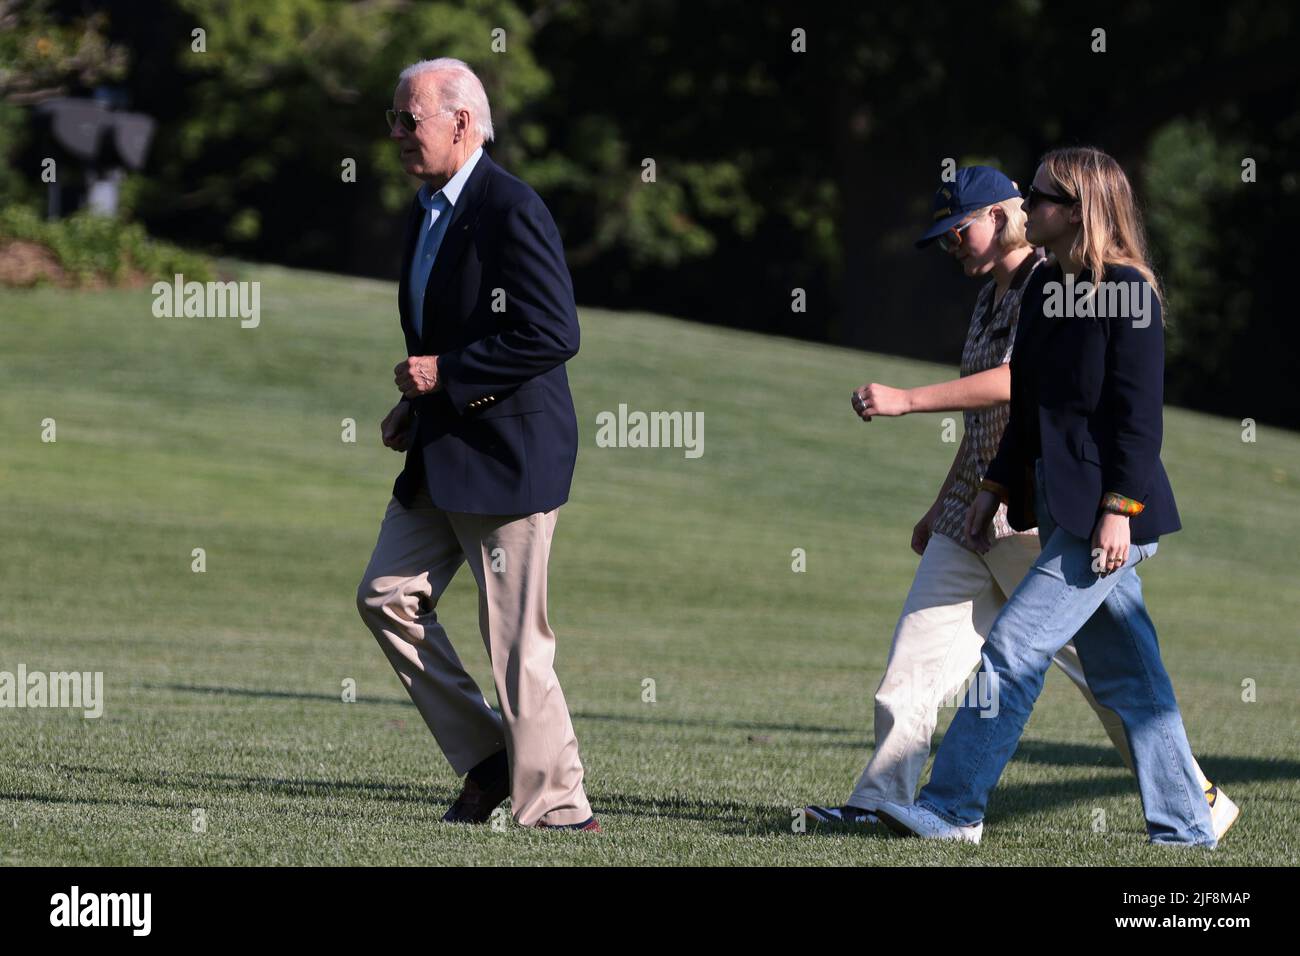 Washington, USA. 30th June, 2022. President Joe Biden, arrives on the South Lawn of the White House alongside his 2 granddaughters, Finnegan Biden and Maisy Biden, on June 30, 2022 in Washington, DC. Biden returned to Washington after attending summits in Germany and Spain. (Photo by Oliver Contreras/SIPA USA) Credit: Sipa USA/Alamy Live News Stock Photo